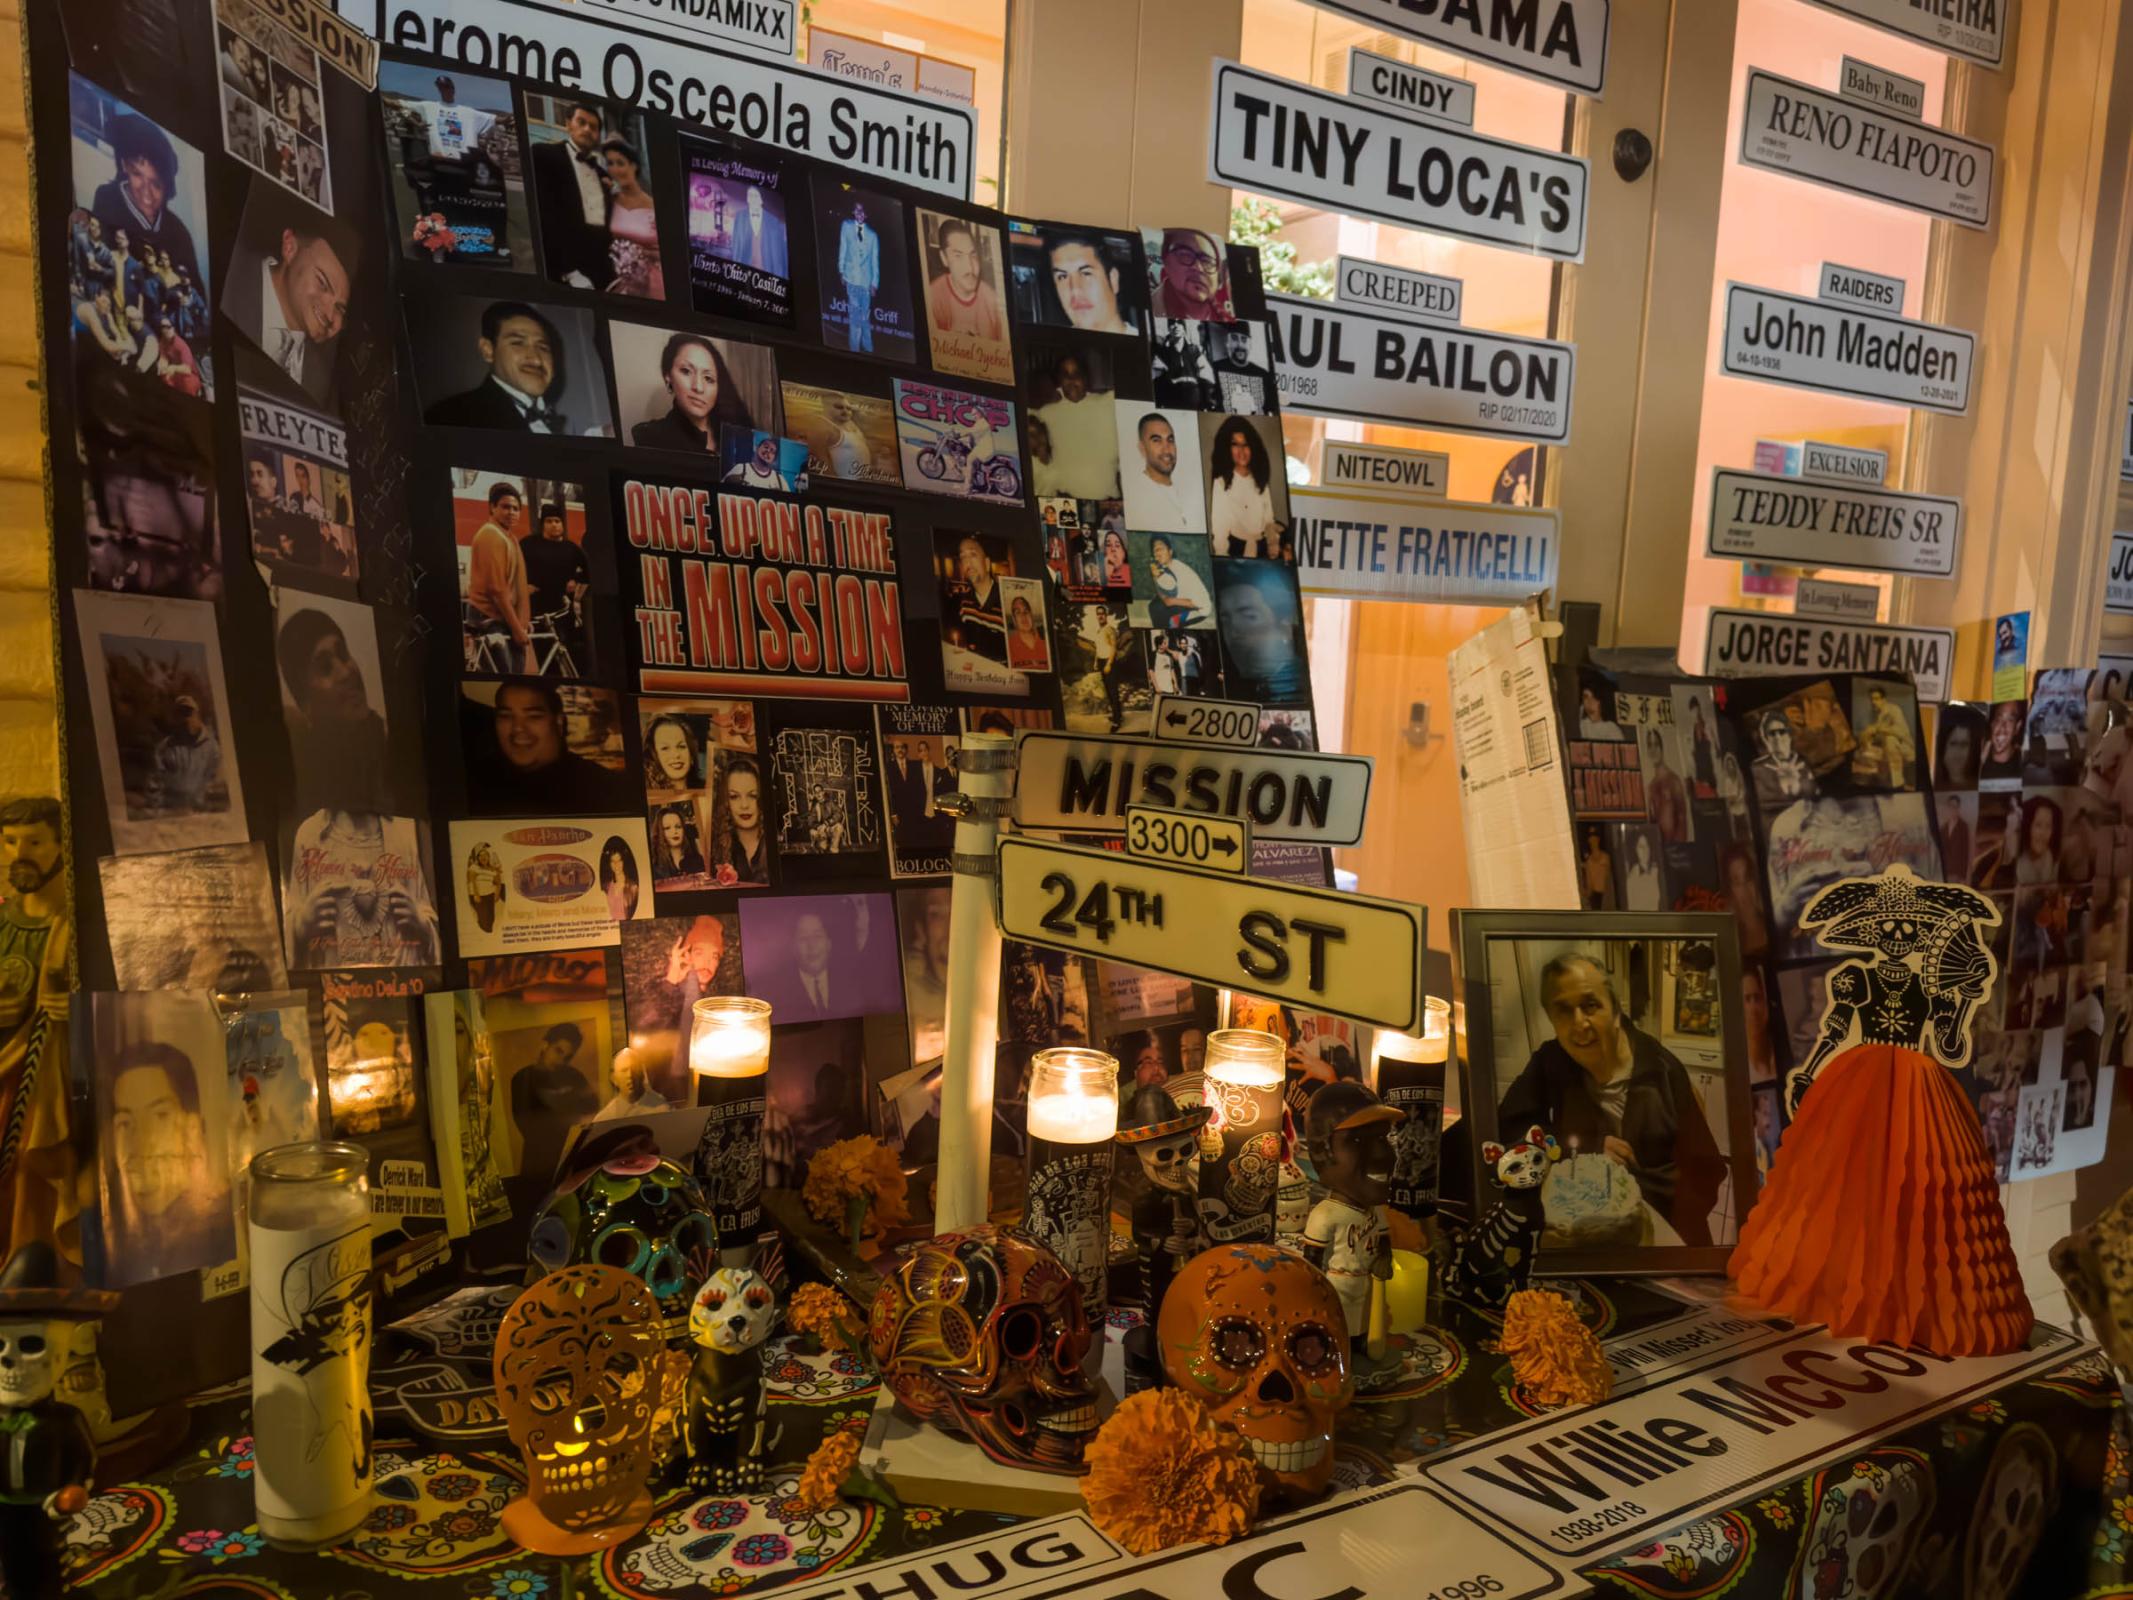 Day of the Dead Celebration - Altar to remember the lost loved ones from the Mission...